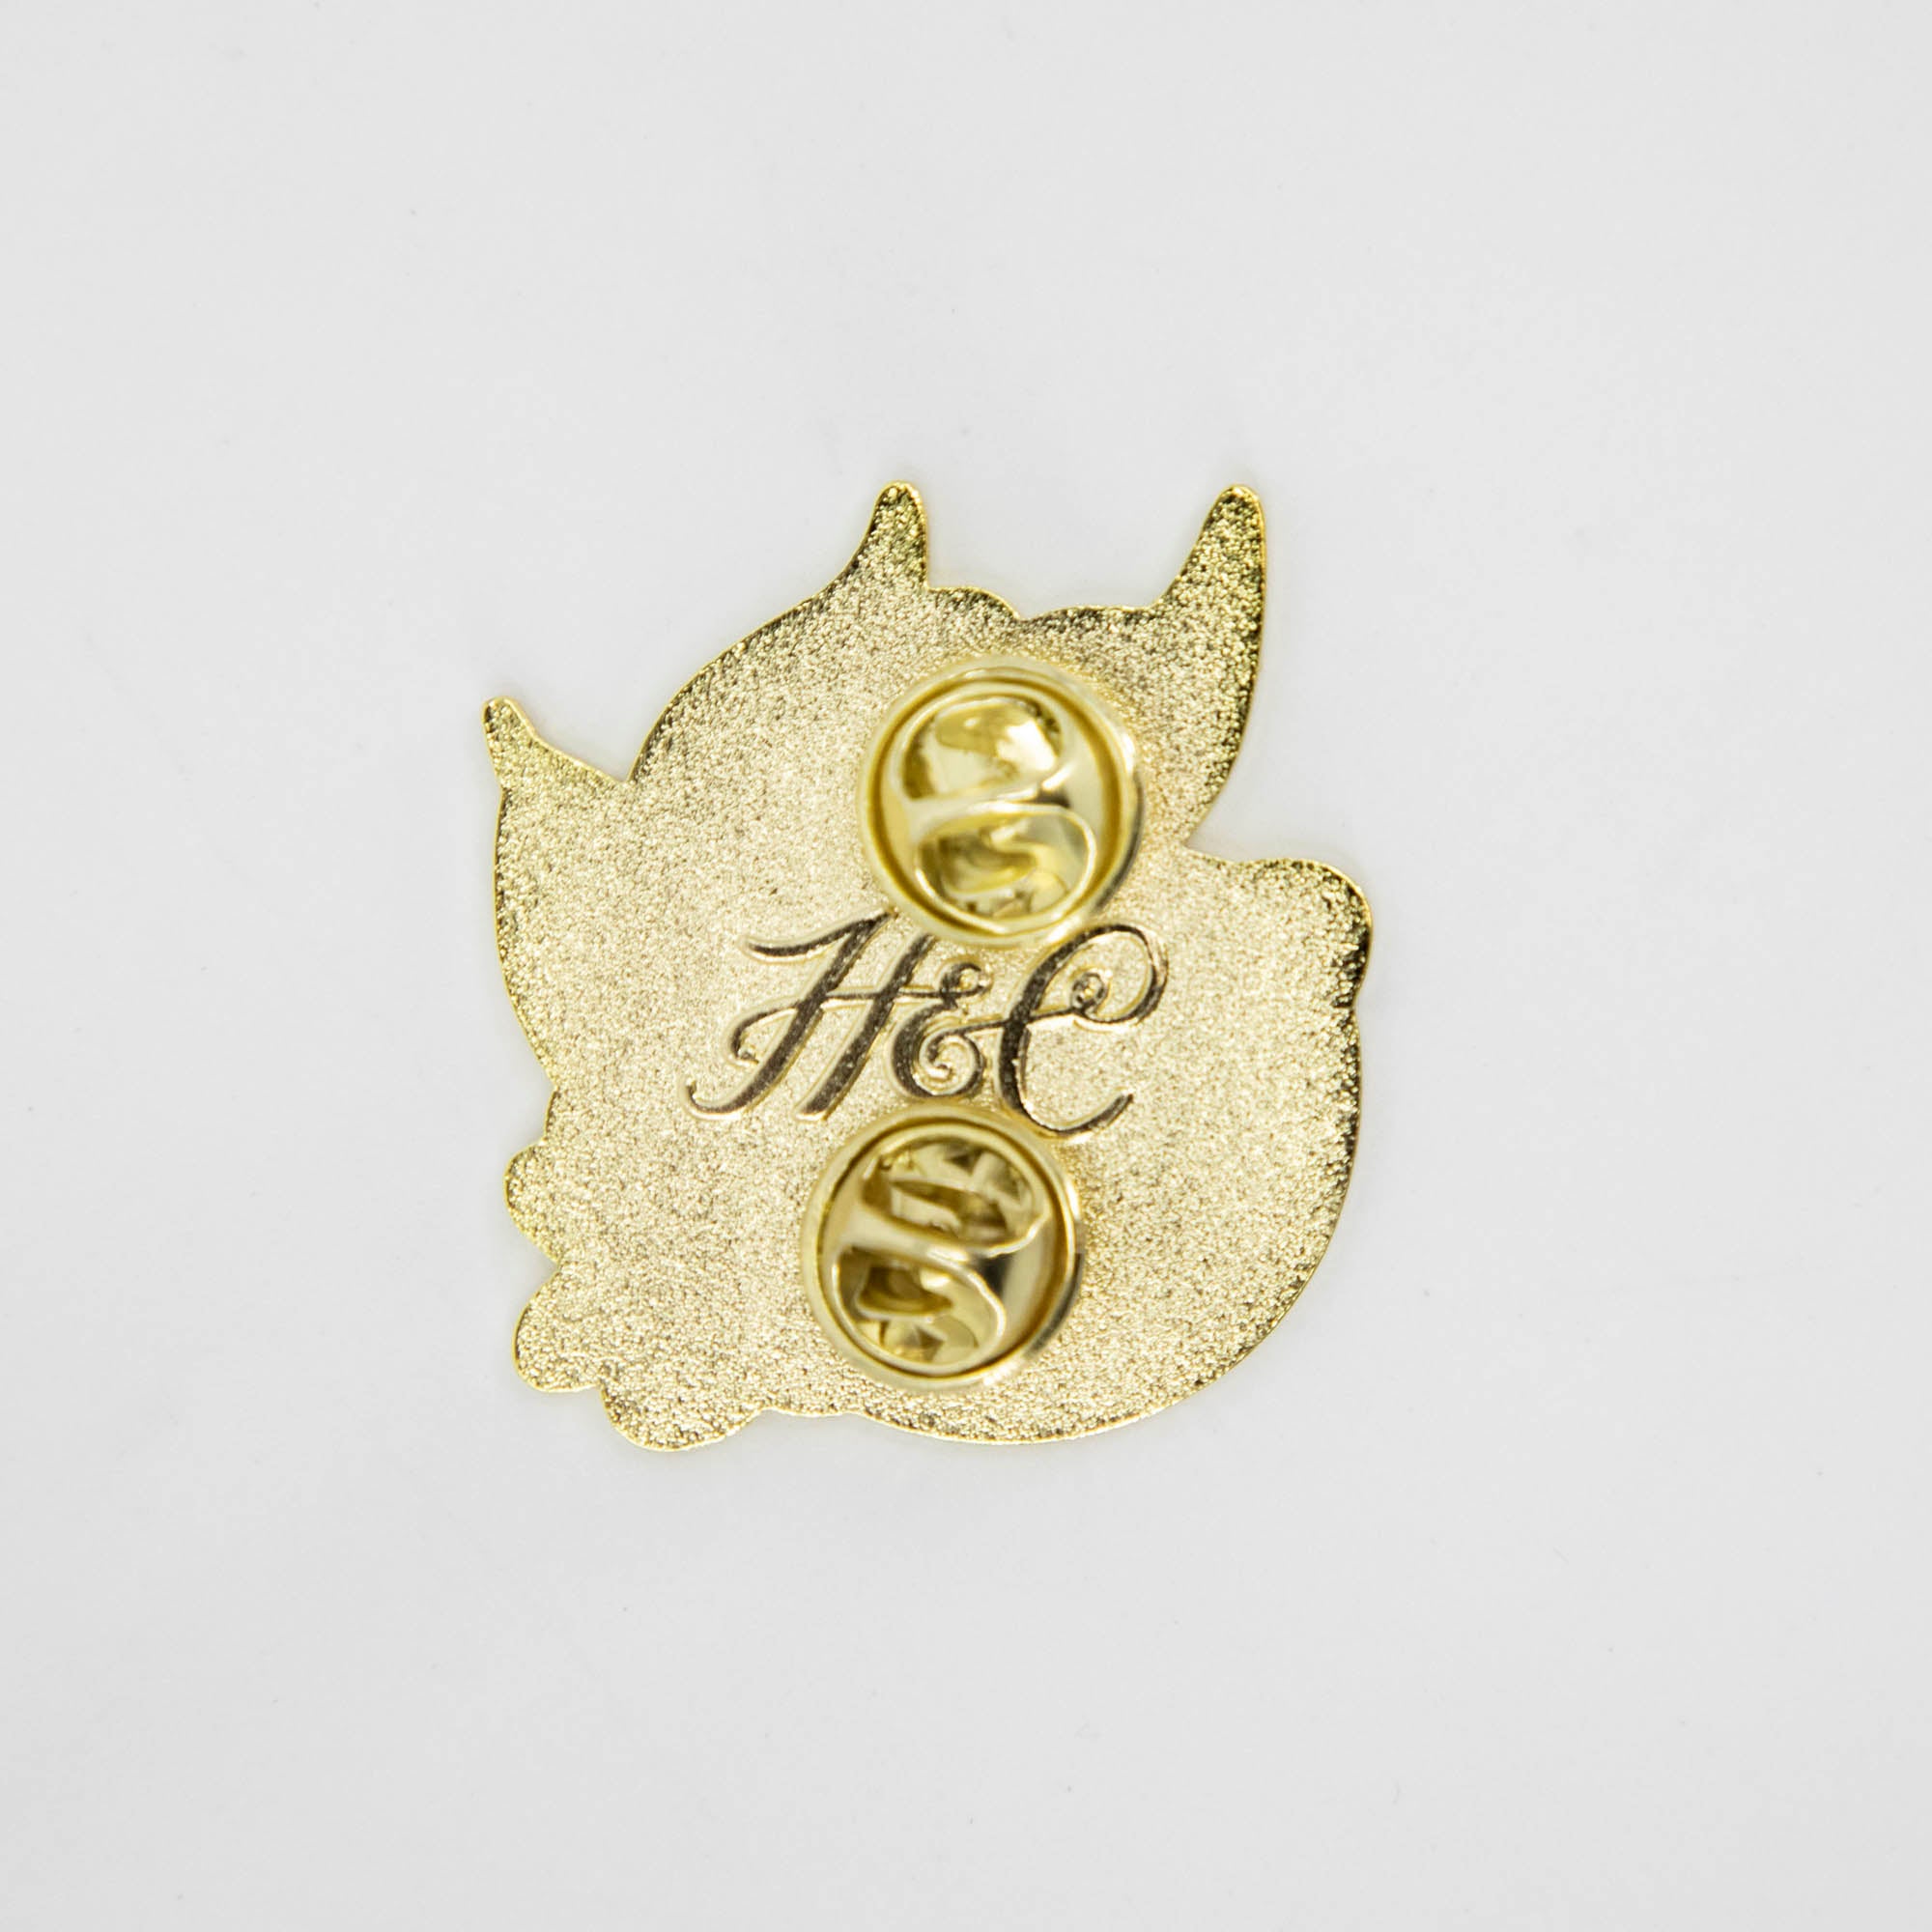 A Lemon Enamel Pin with a monogram on it by Hester &amp; Cook.